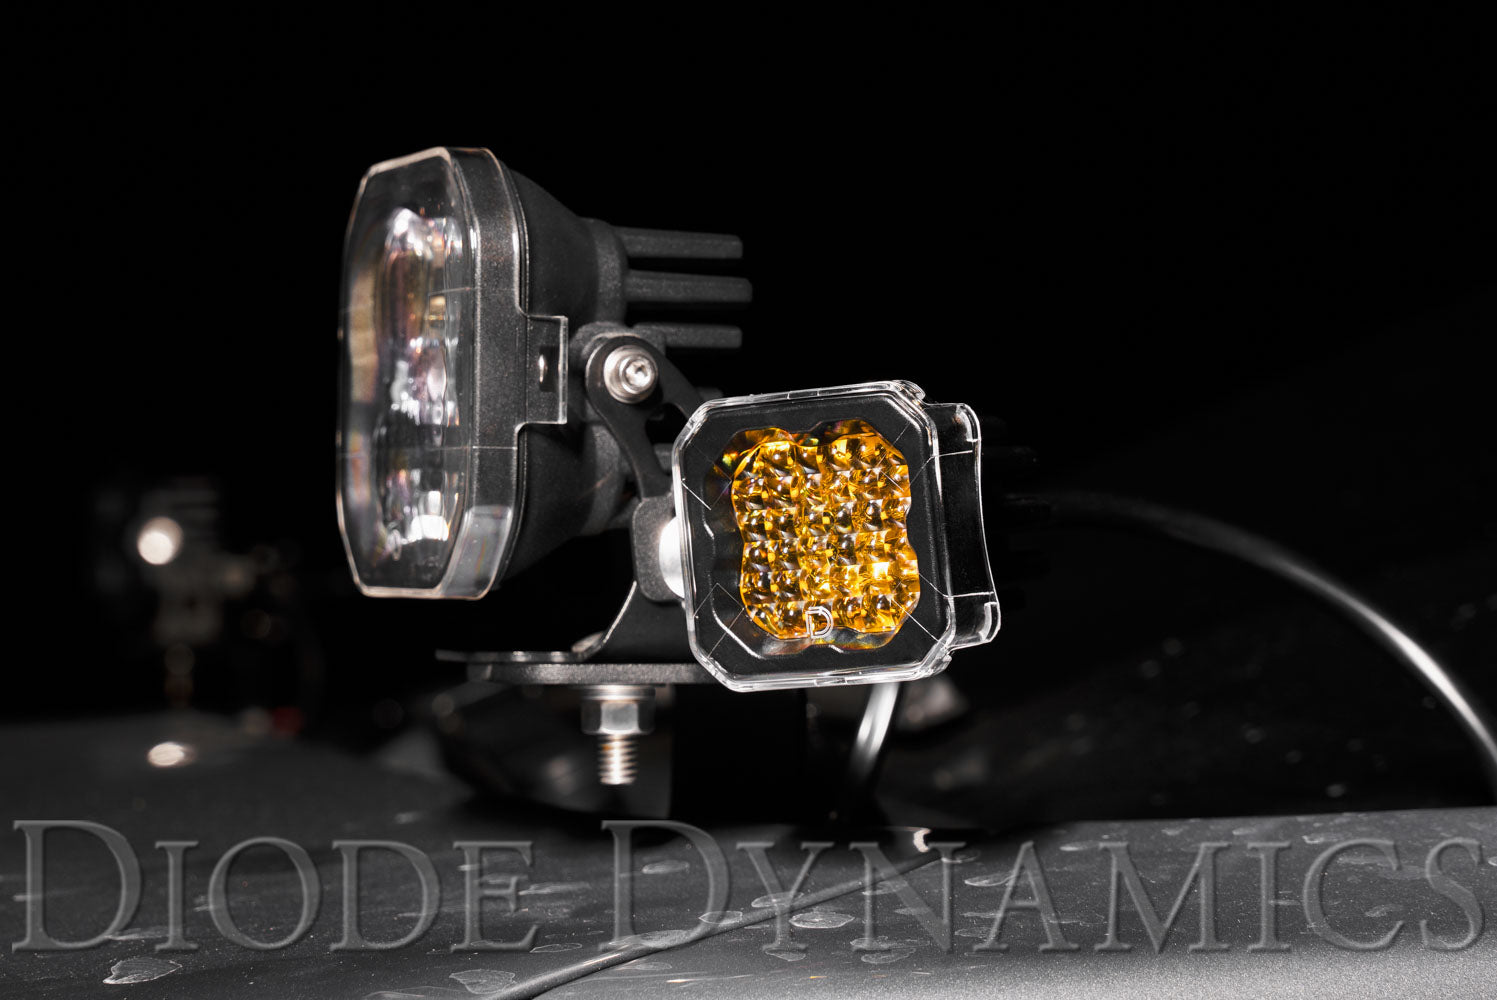 SSC1 Stage Series C1 LED Pod Cover Clear (Single) Diode Dynamics-dd6606